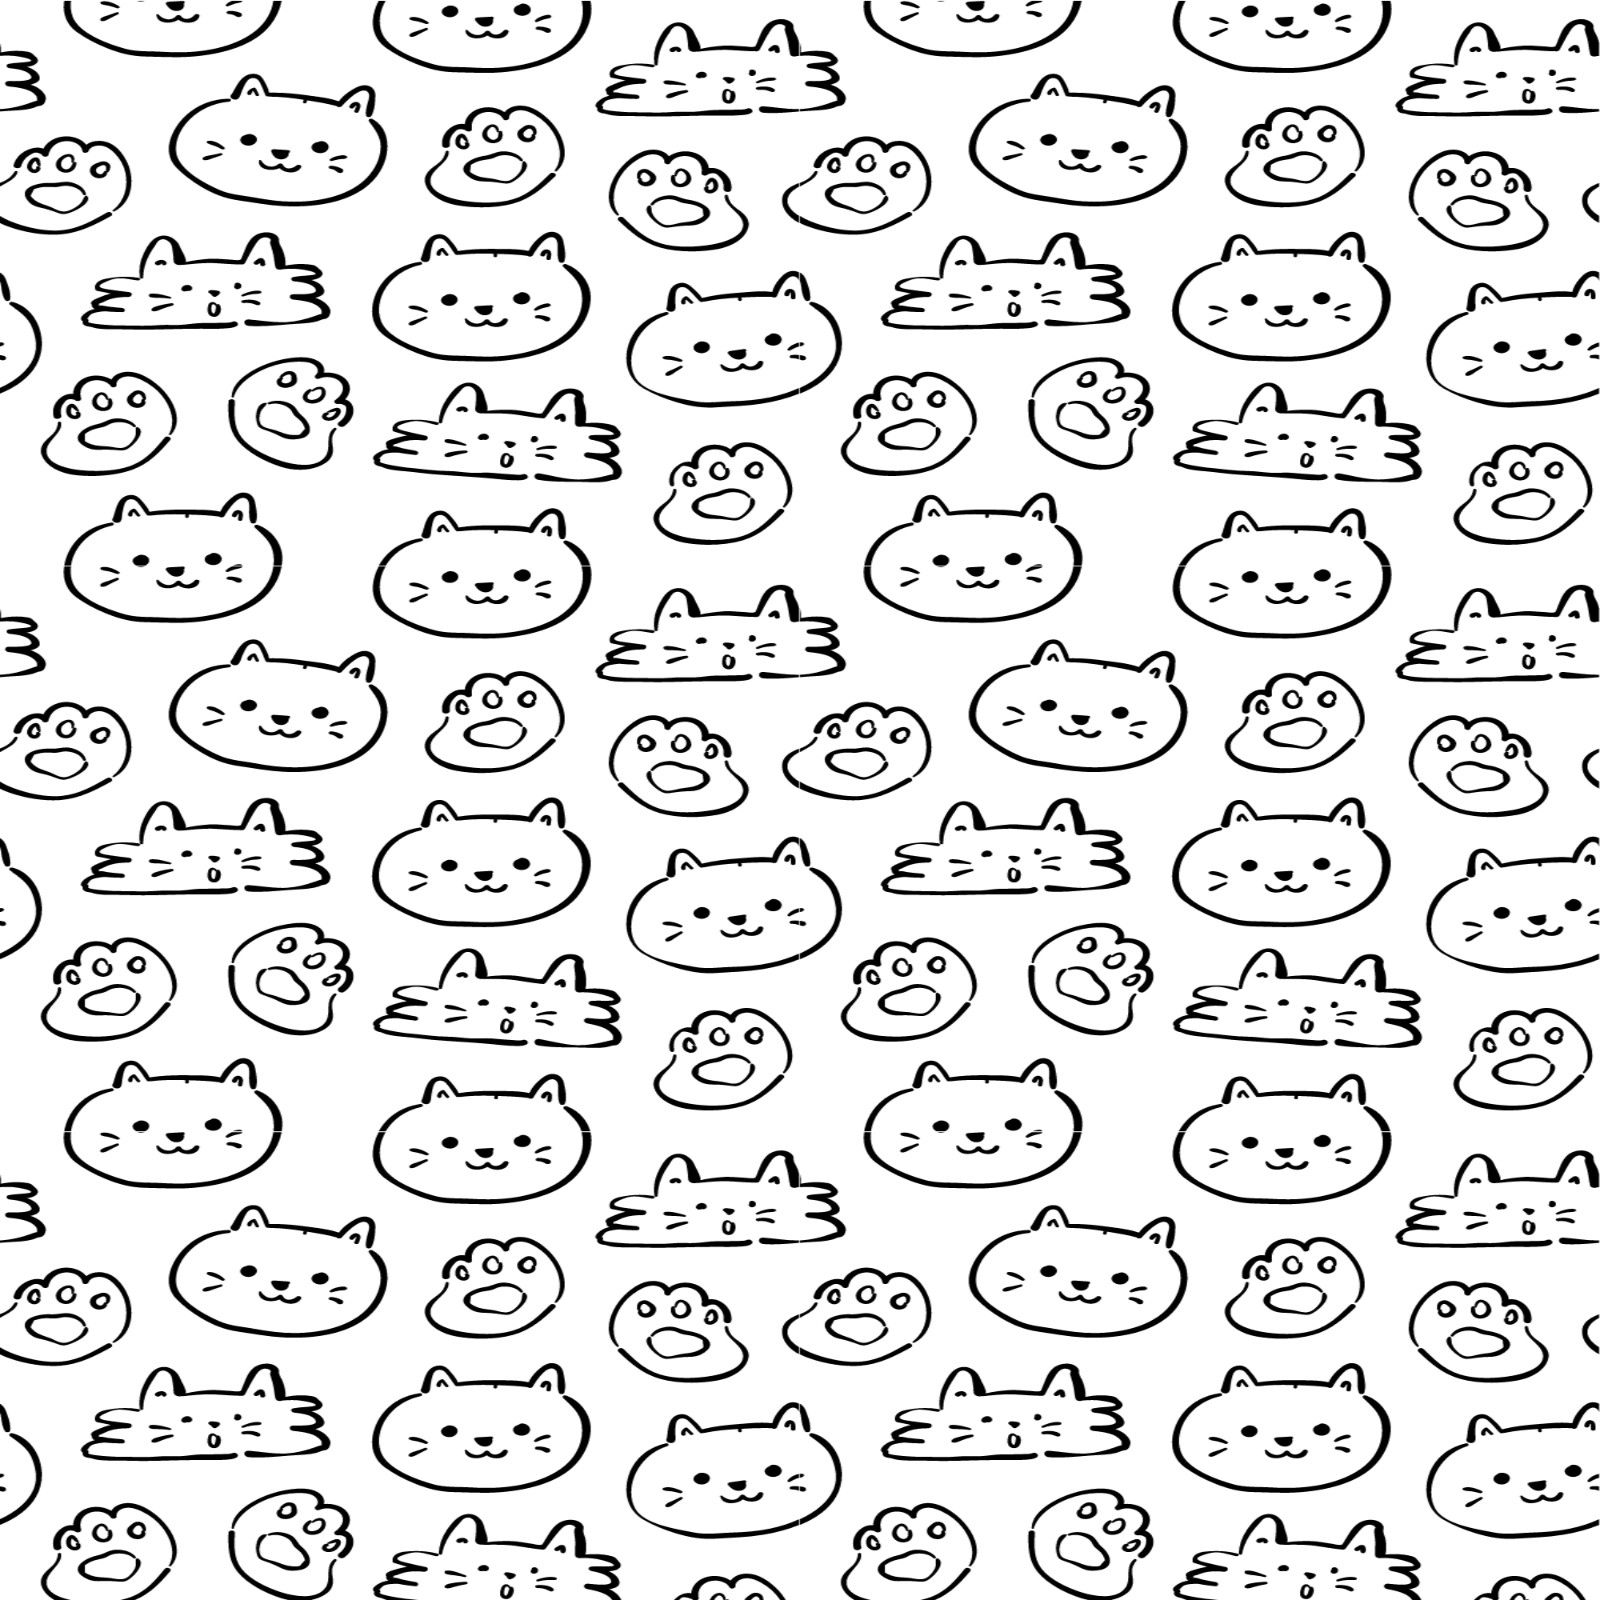 Cute Animal Patterns cover image.